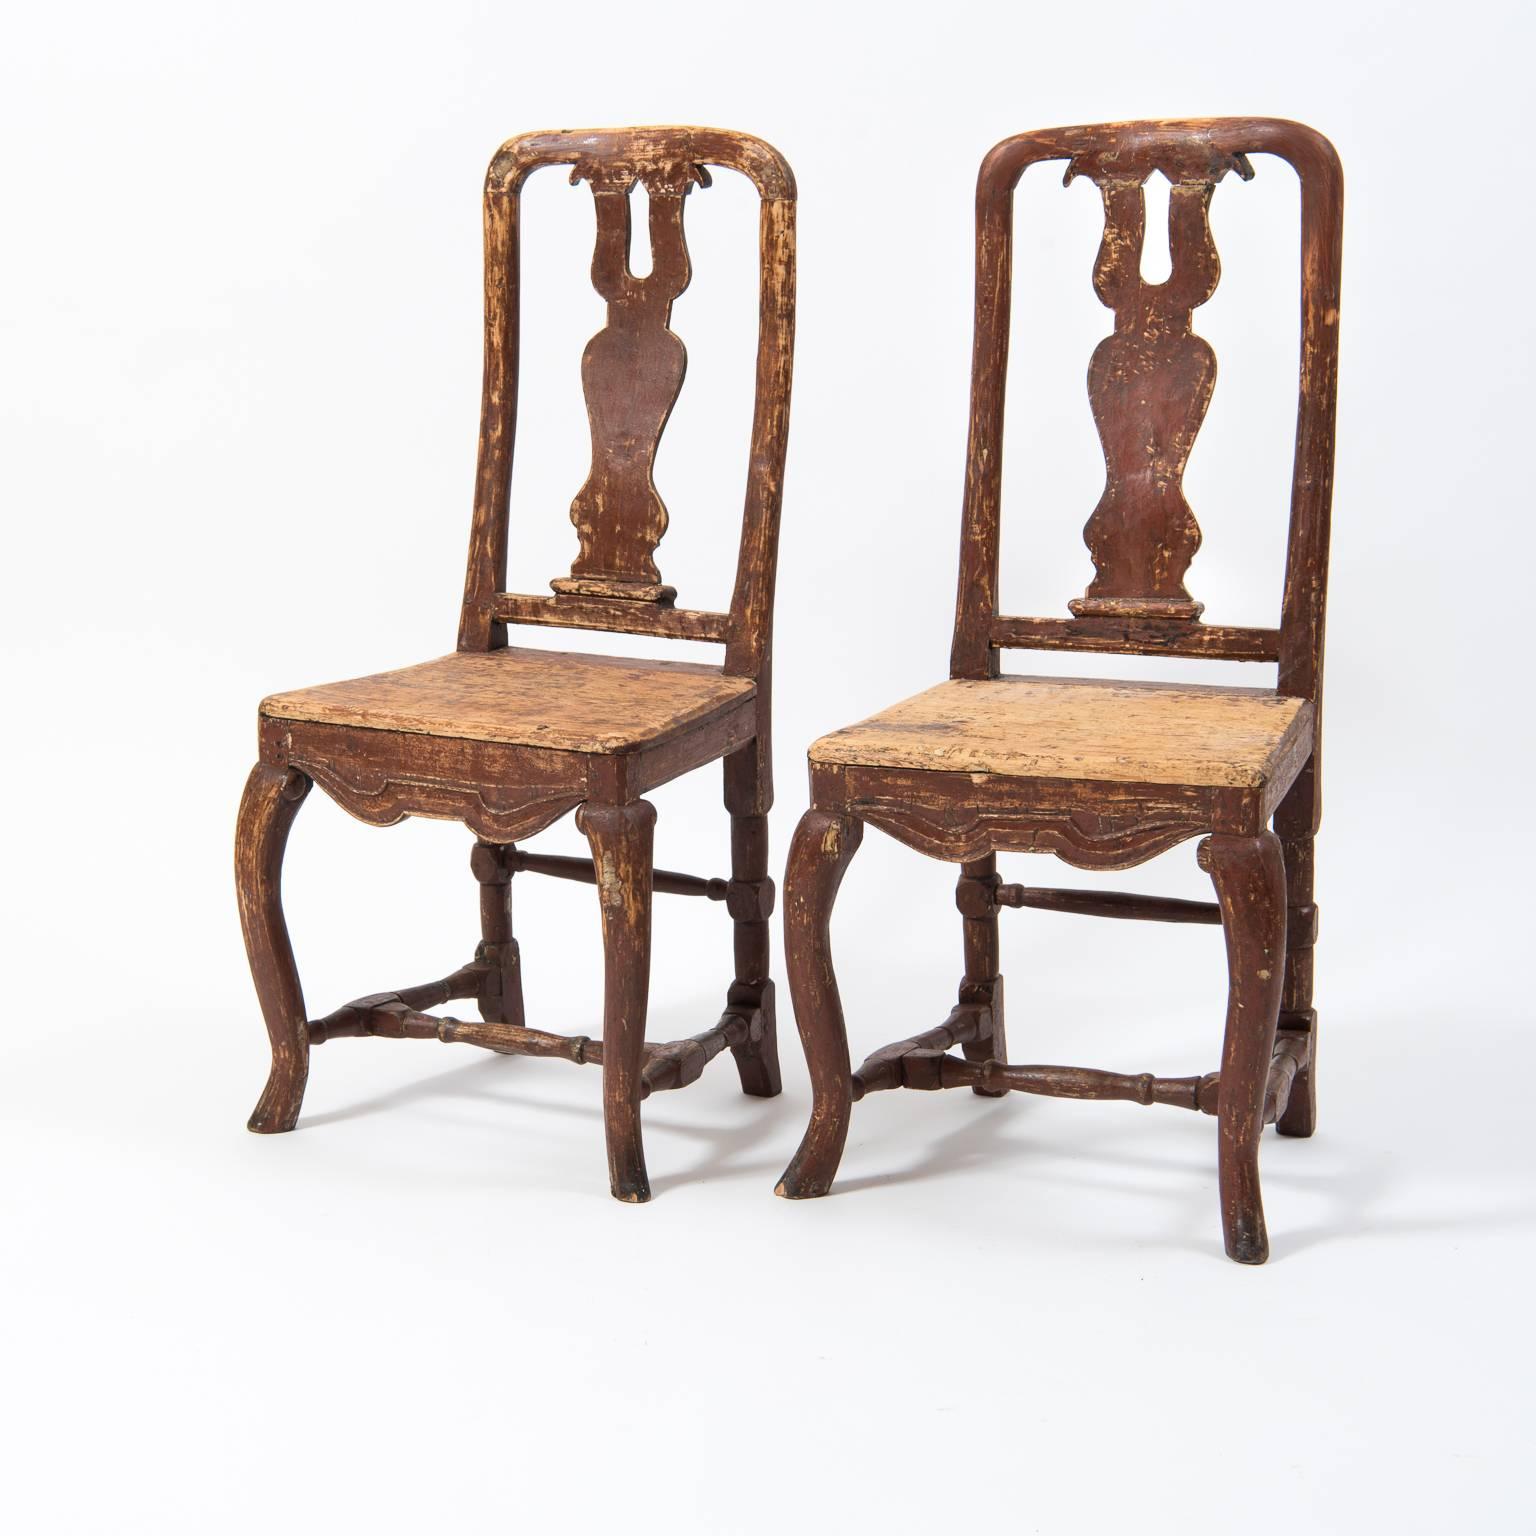 Pair of 18th Century Antique Swedish Baroque Dining Room Chairs Pine Tall Backs For Sale 2